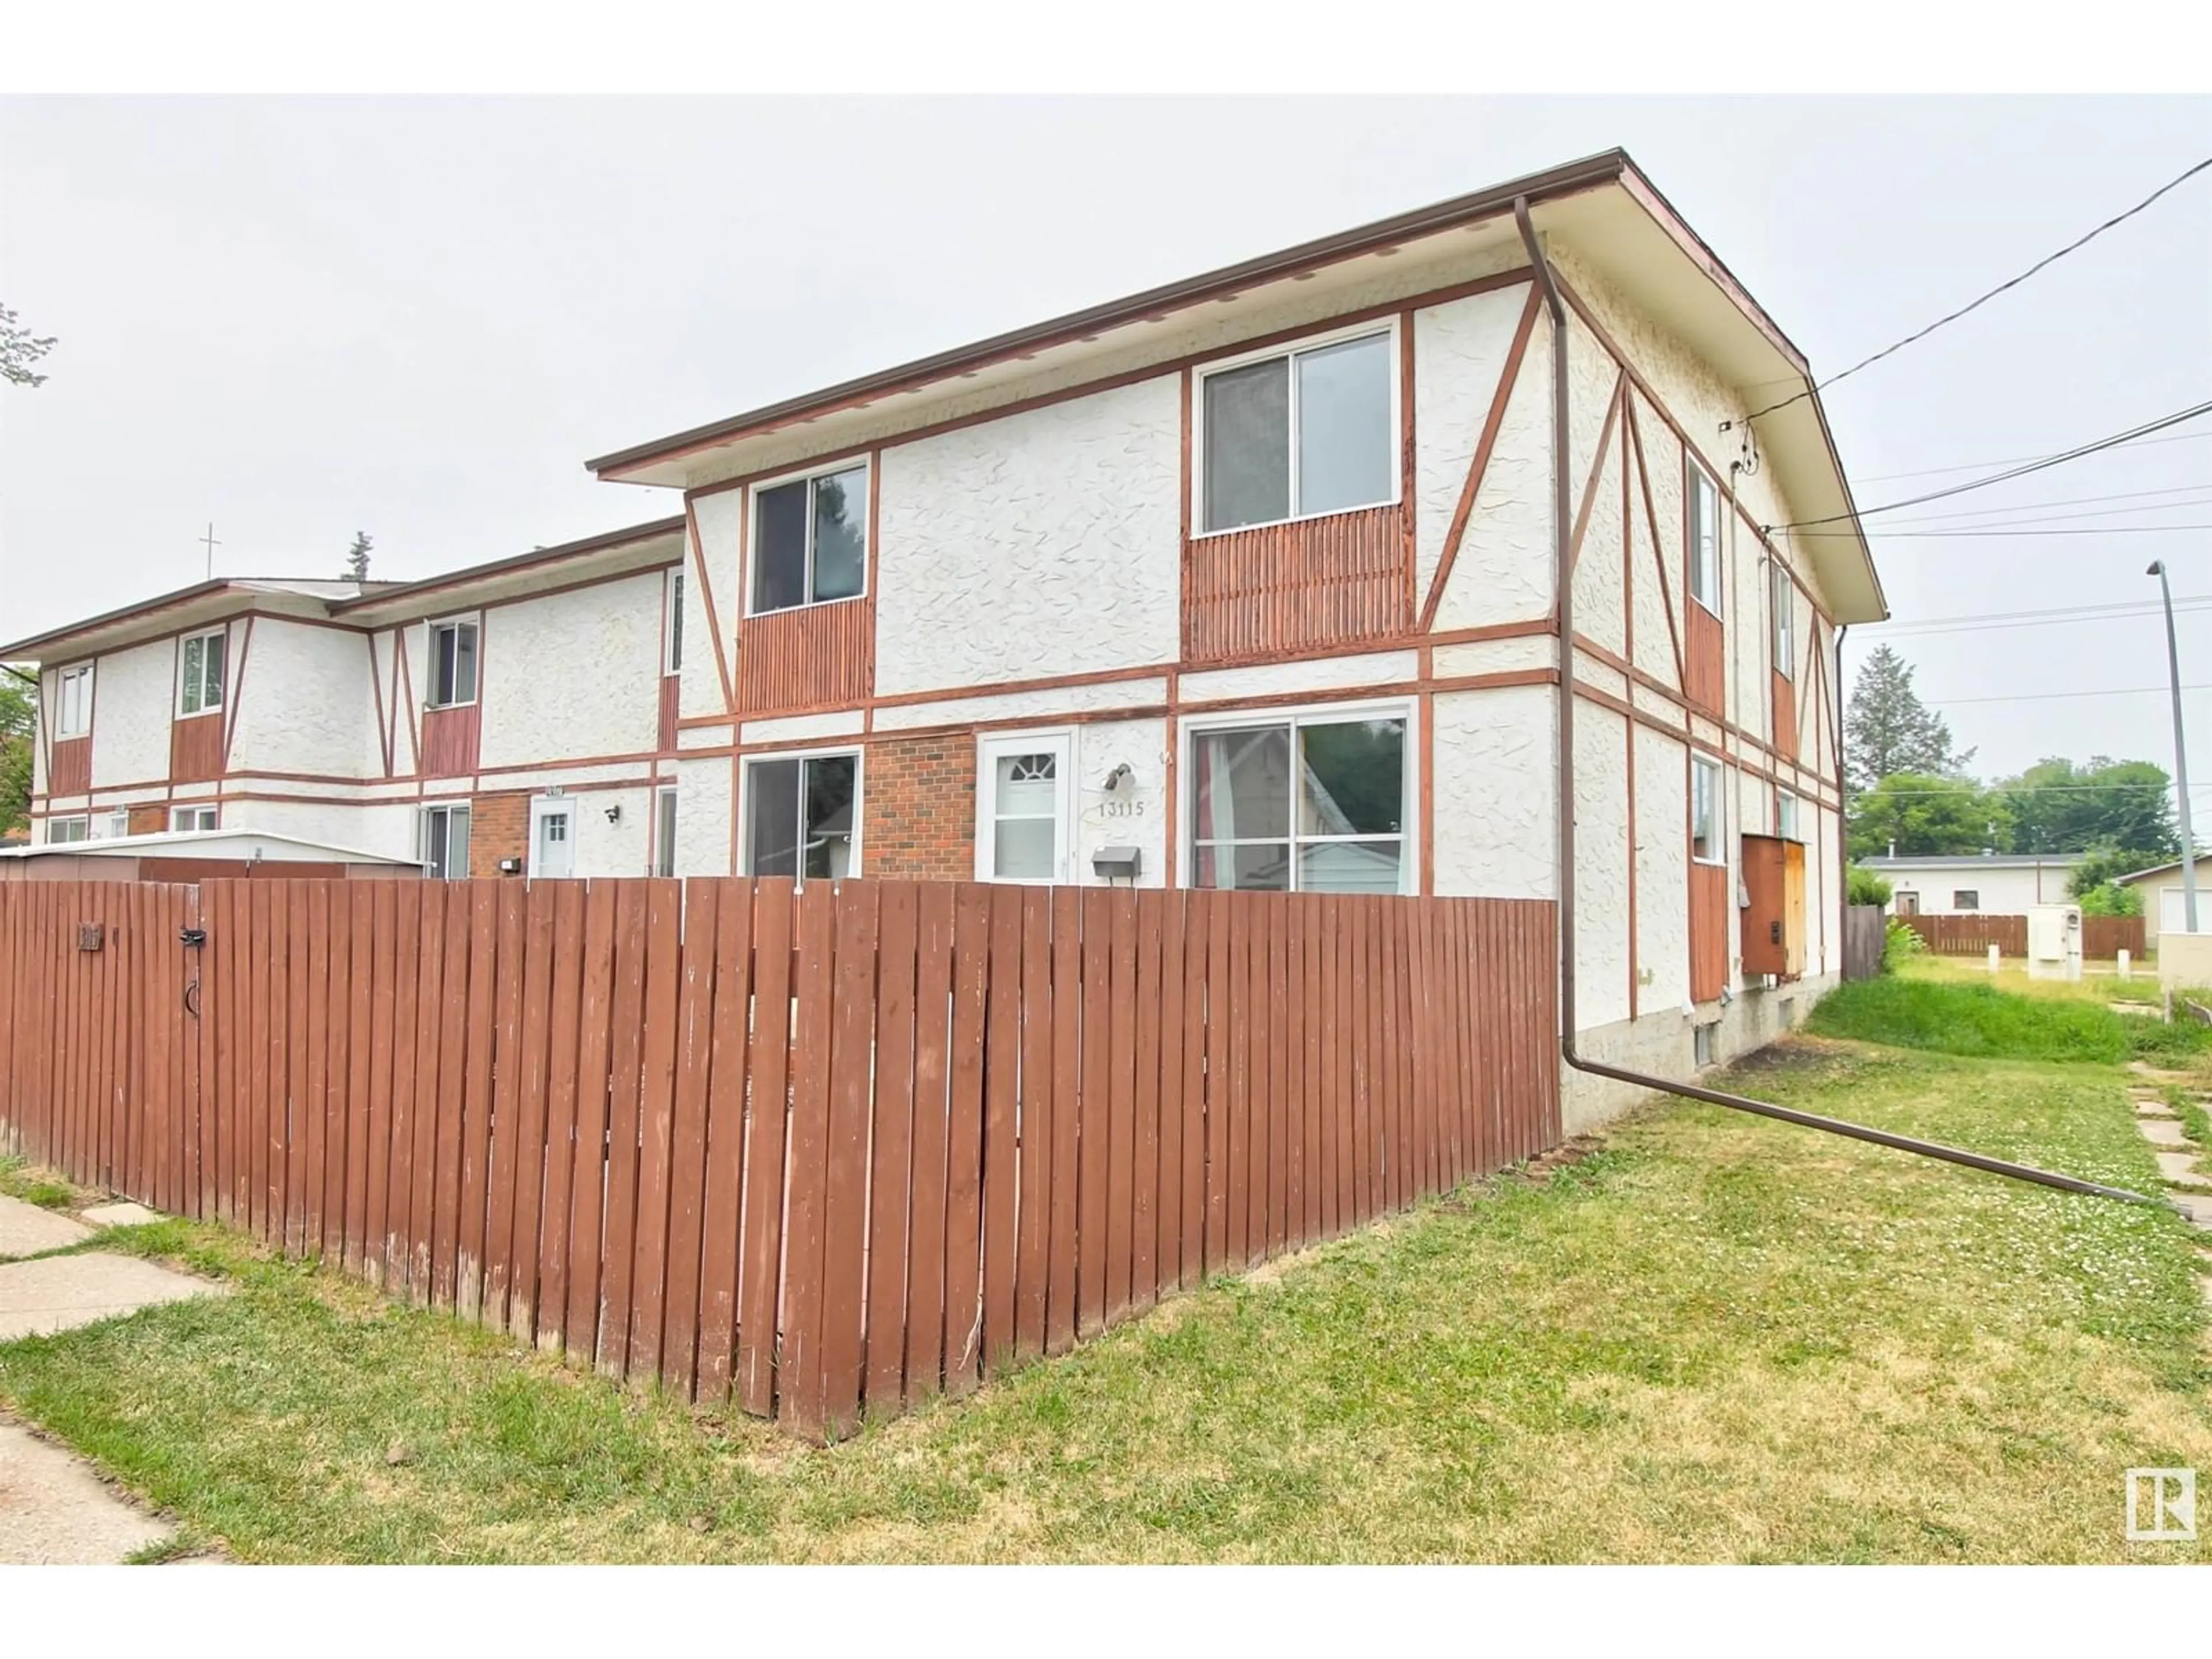 A pic from exterior of the house or condo for 13115 116 ST NW, Edmonton Alberta T5E5H6